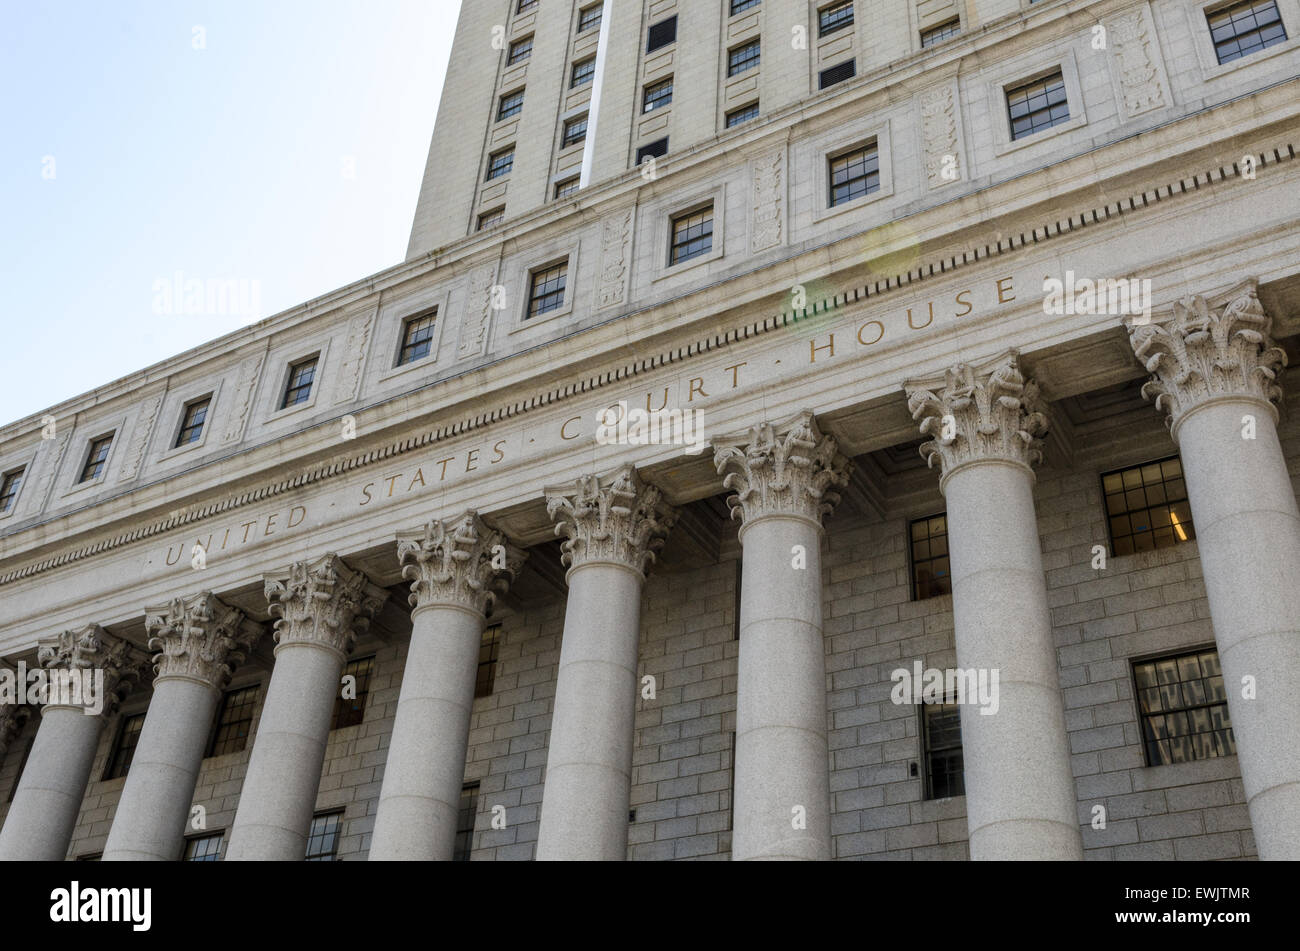 United States Court House in Lower Manhattan in New York city Stockfoto